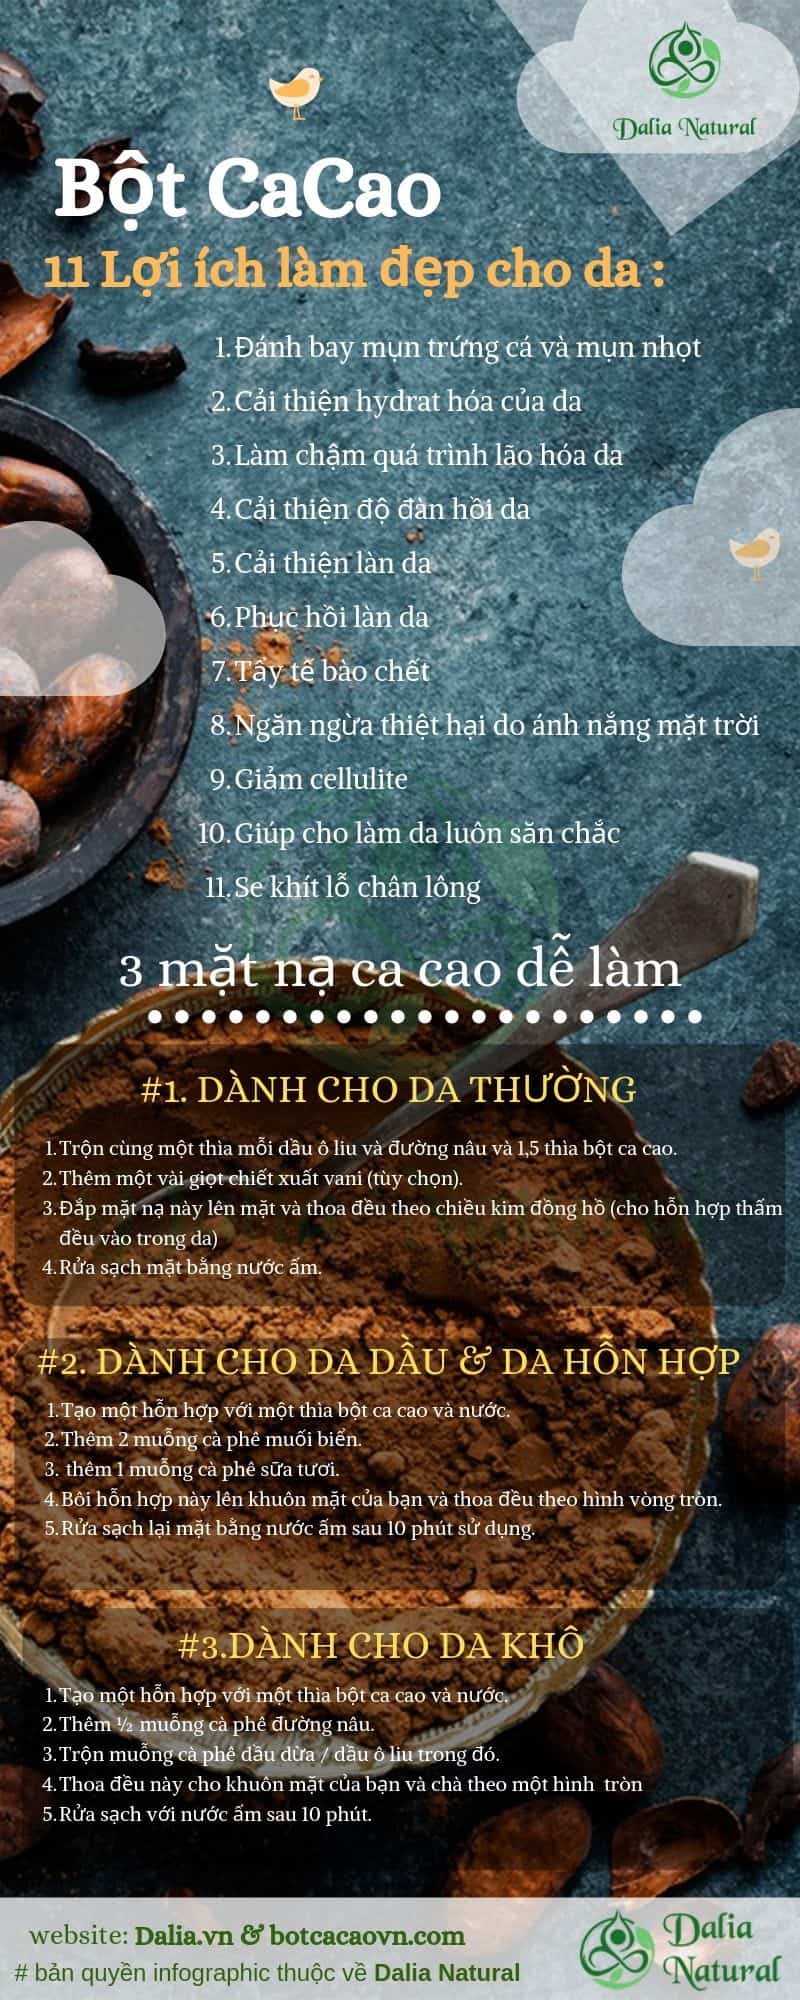 bot cacao infographic 0